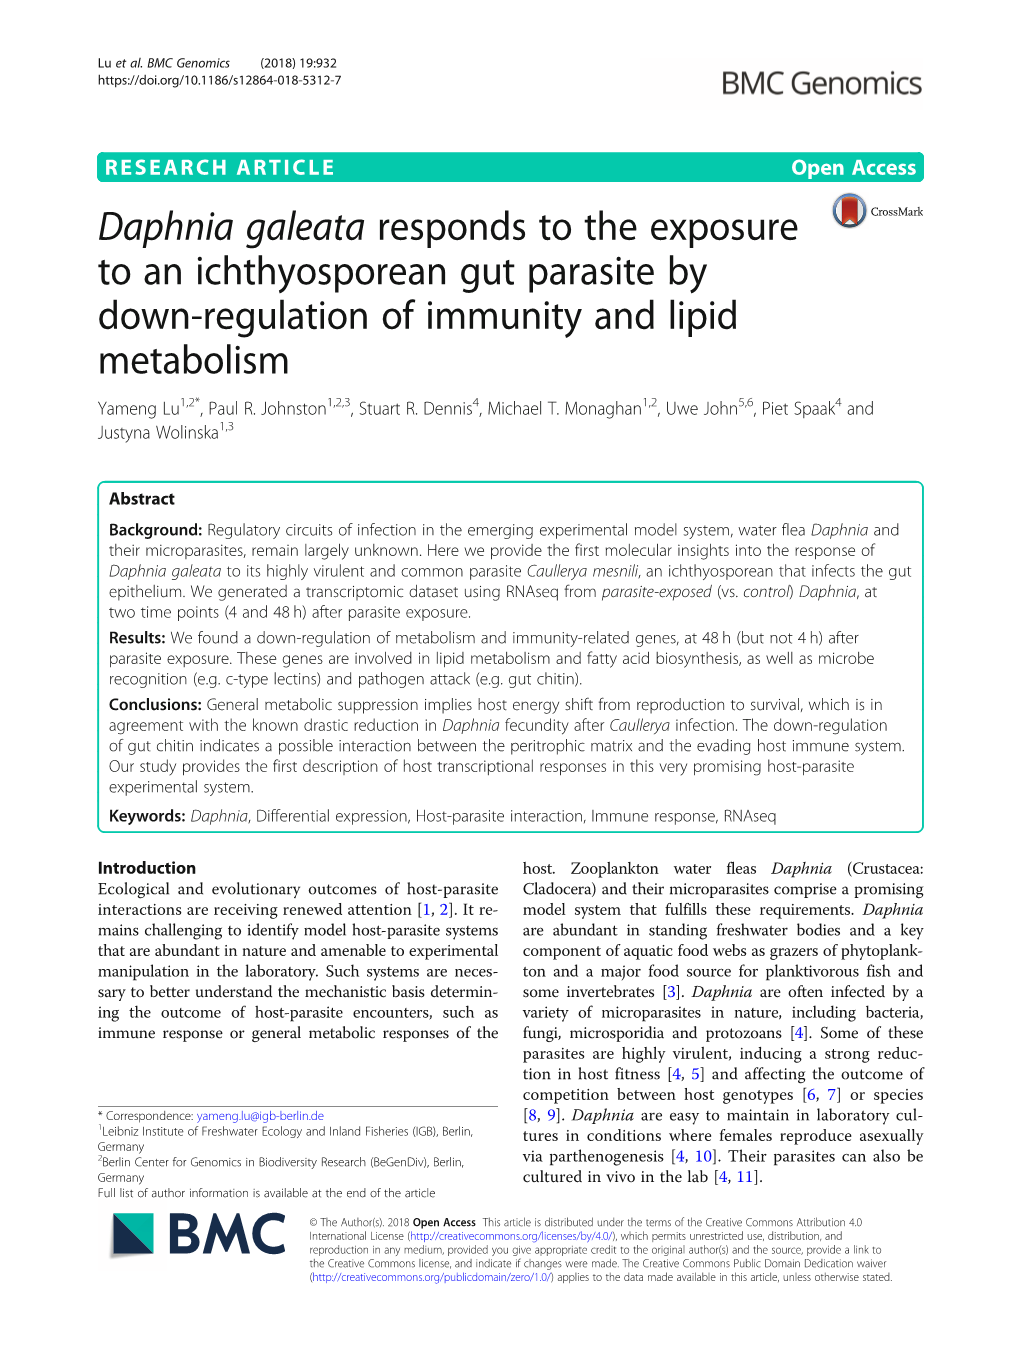 Daphnia Galeata Responds to the Exposure to an Ichthyosporean Gut Parasite by Down-Regulation of Immunity and Lipid Metabolism Yameng Lu1,2*, Paul R